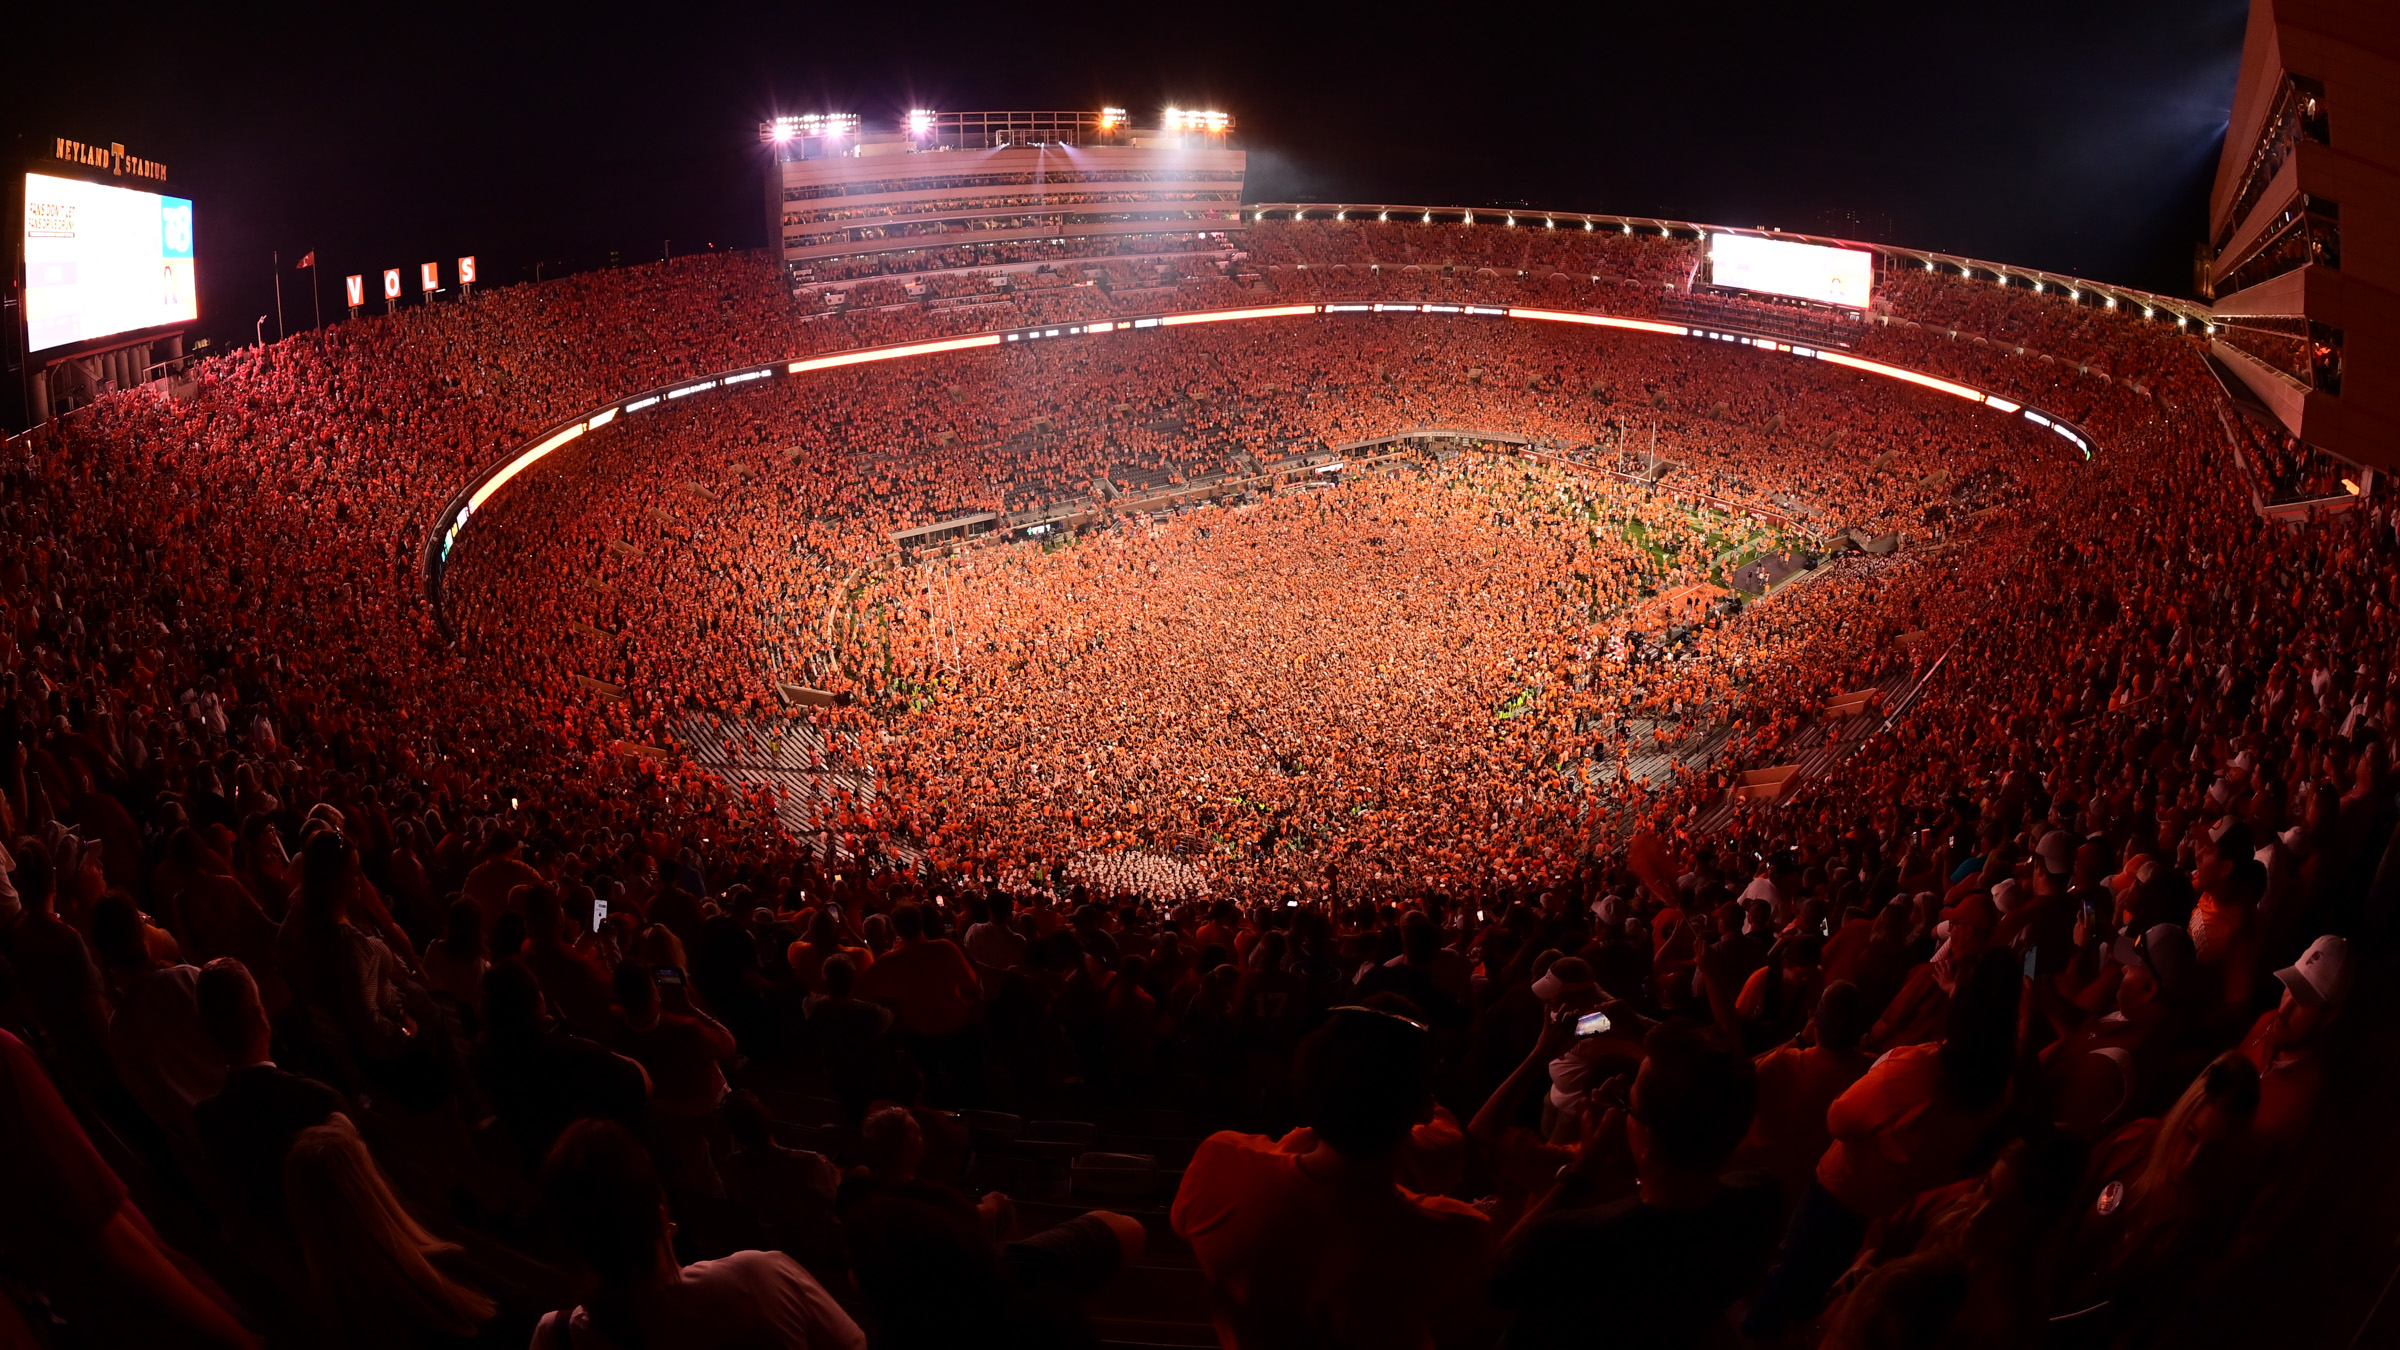 Knoxville, TN - October 15, 2022 - Neyland Stadium: Fans of the Tennessee Volunteers (Vols) storm the field following a regular season game.(Photo by Phil Ellsworth / ESPN Images)